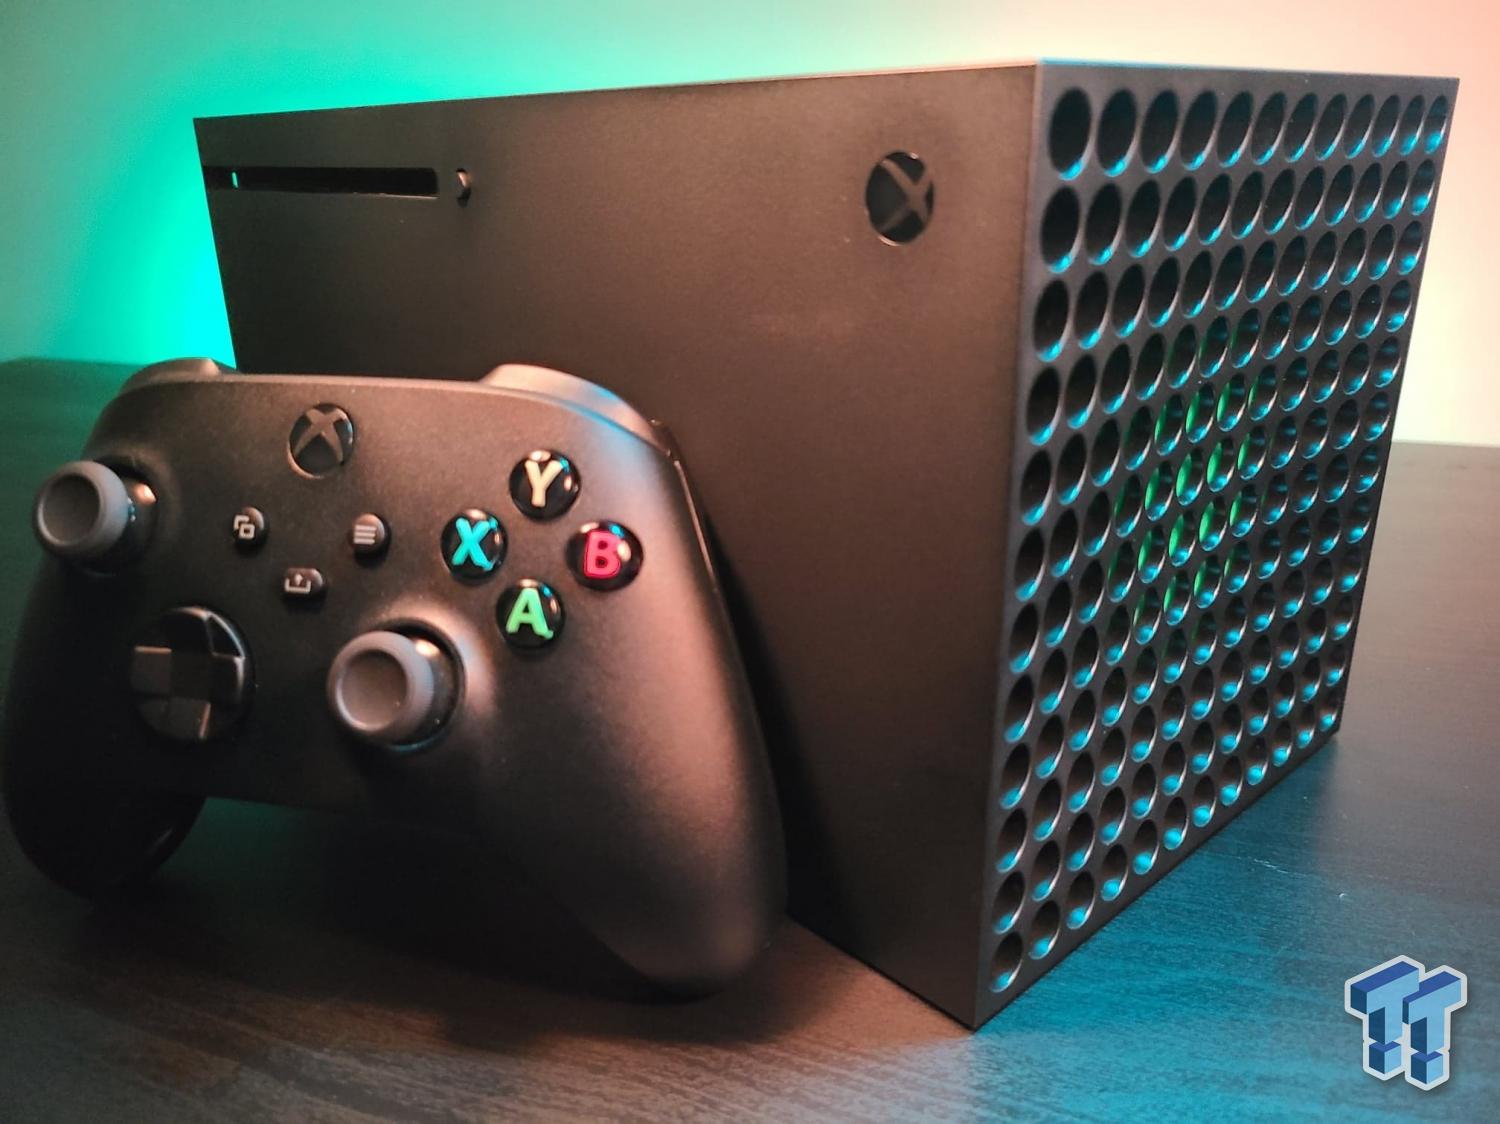 Xbox Series X review: next generation games machine, continuity